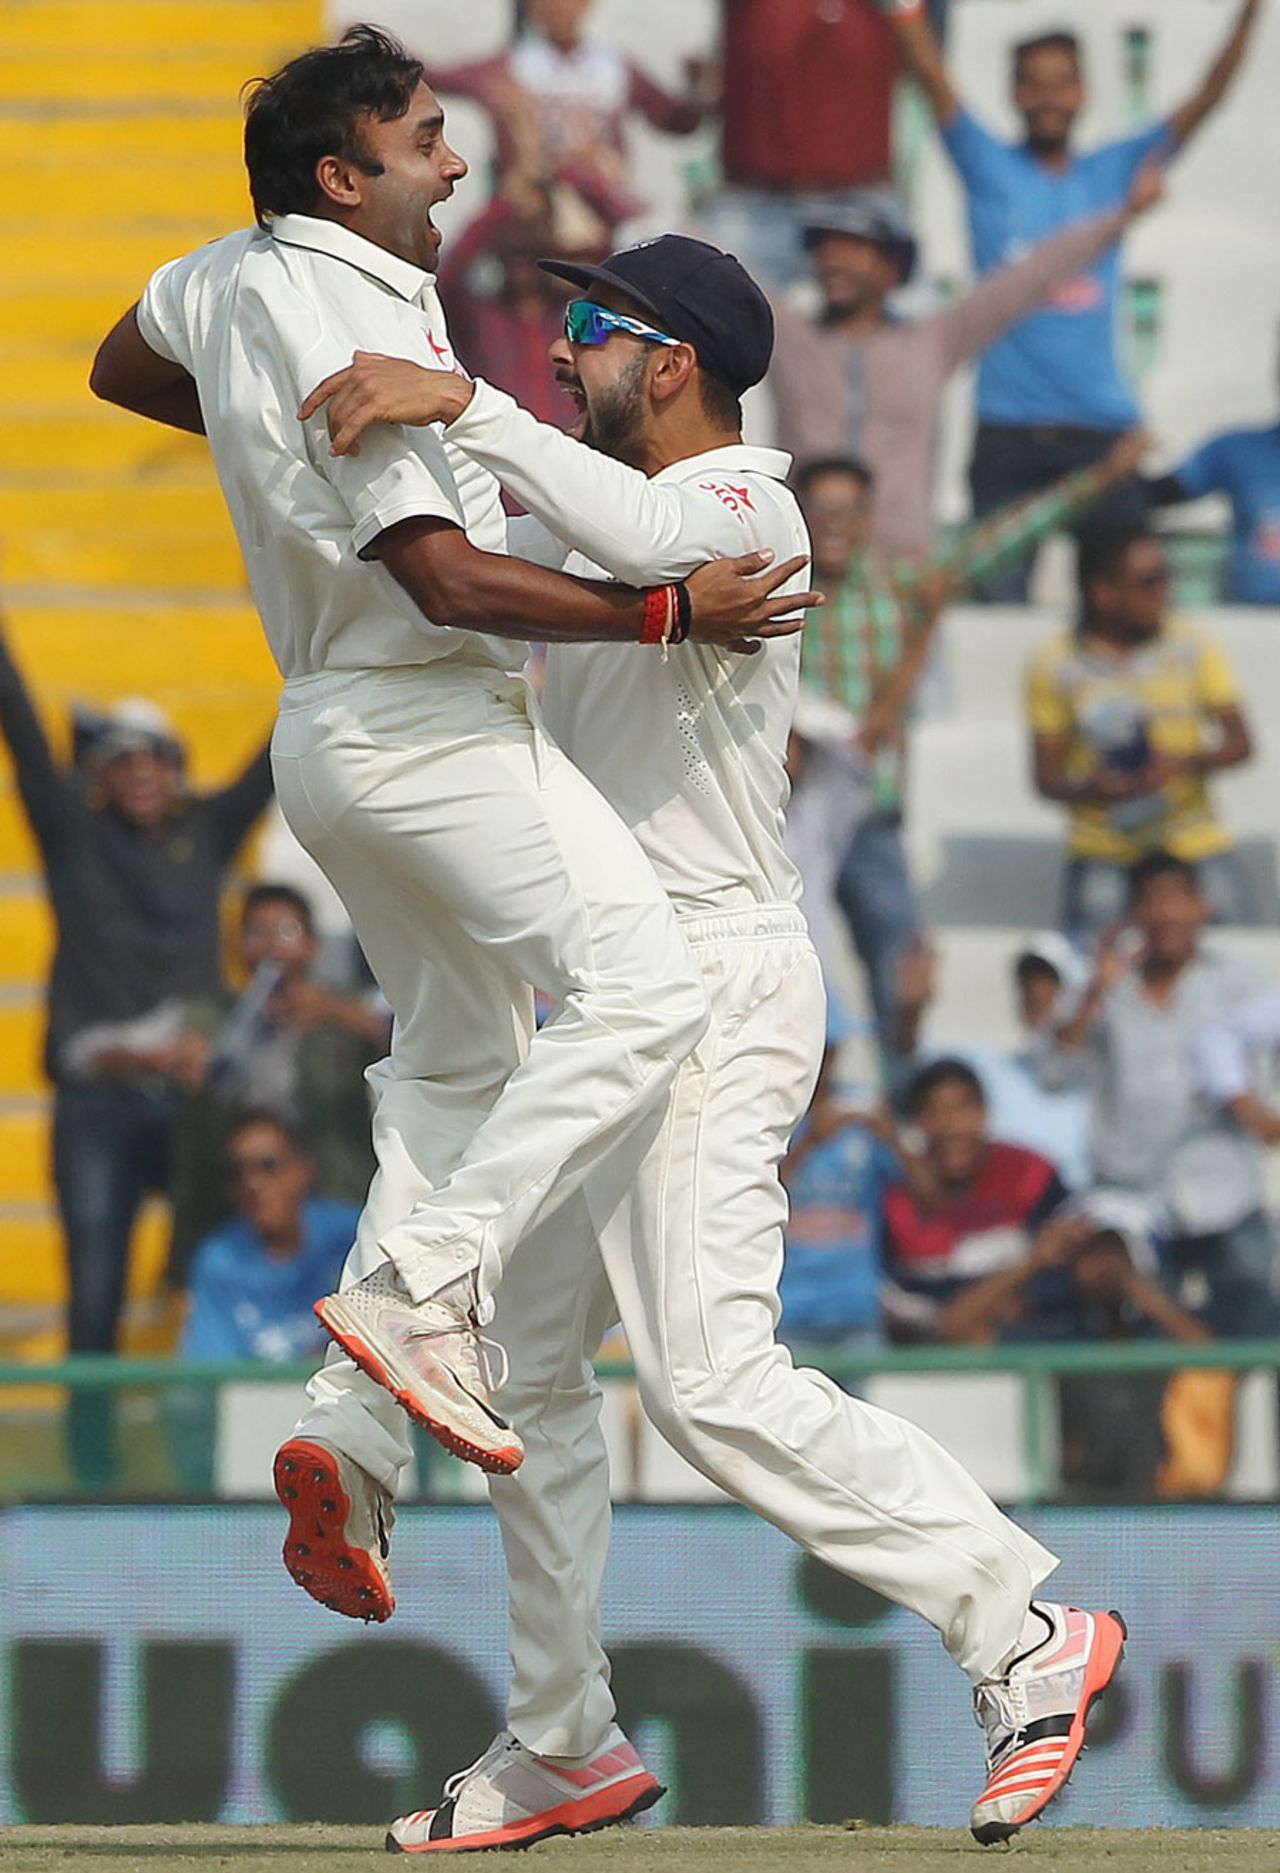 Amit Mishra and Virat Kohli are ecstatic after the wicket of AB de Villiers, India v South Africa, 1st Test, Mohali, 3rd day, November 7, 2015